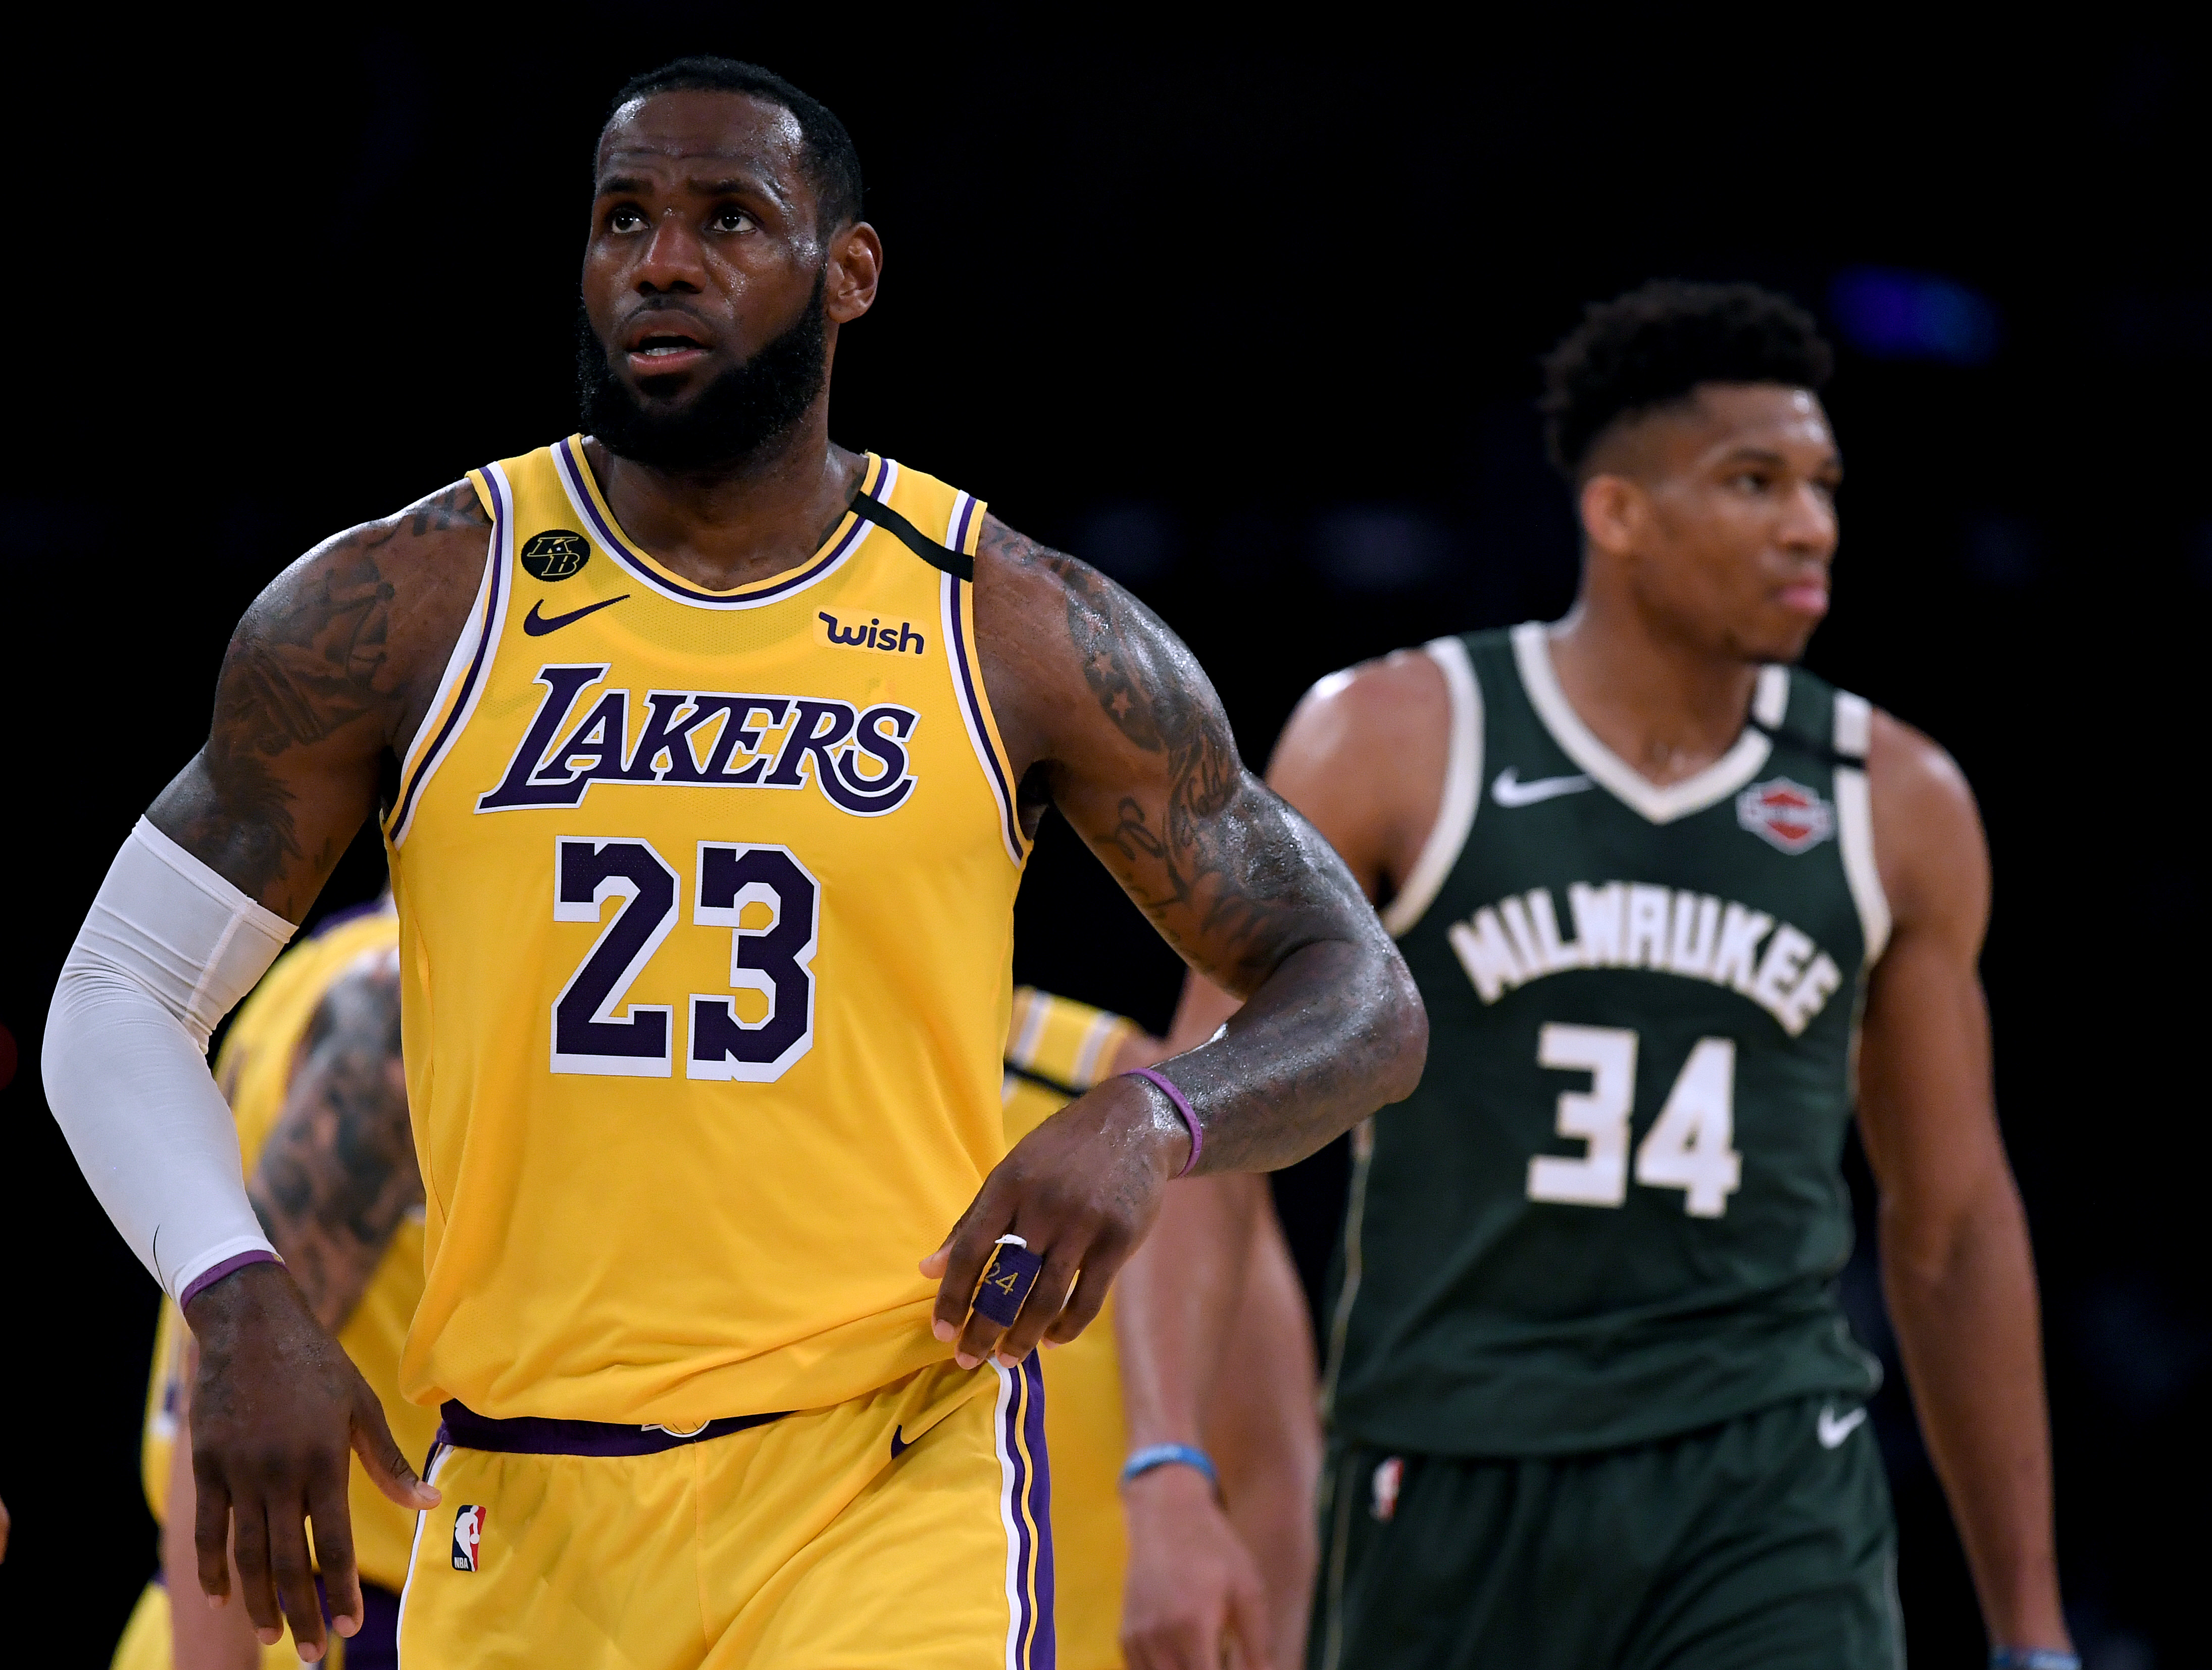 Basketball Forever - CONFIRMED: Team LeBron James and Team Giannis  Antetokounmpo for the 2019 NBA All-Star game!